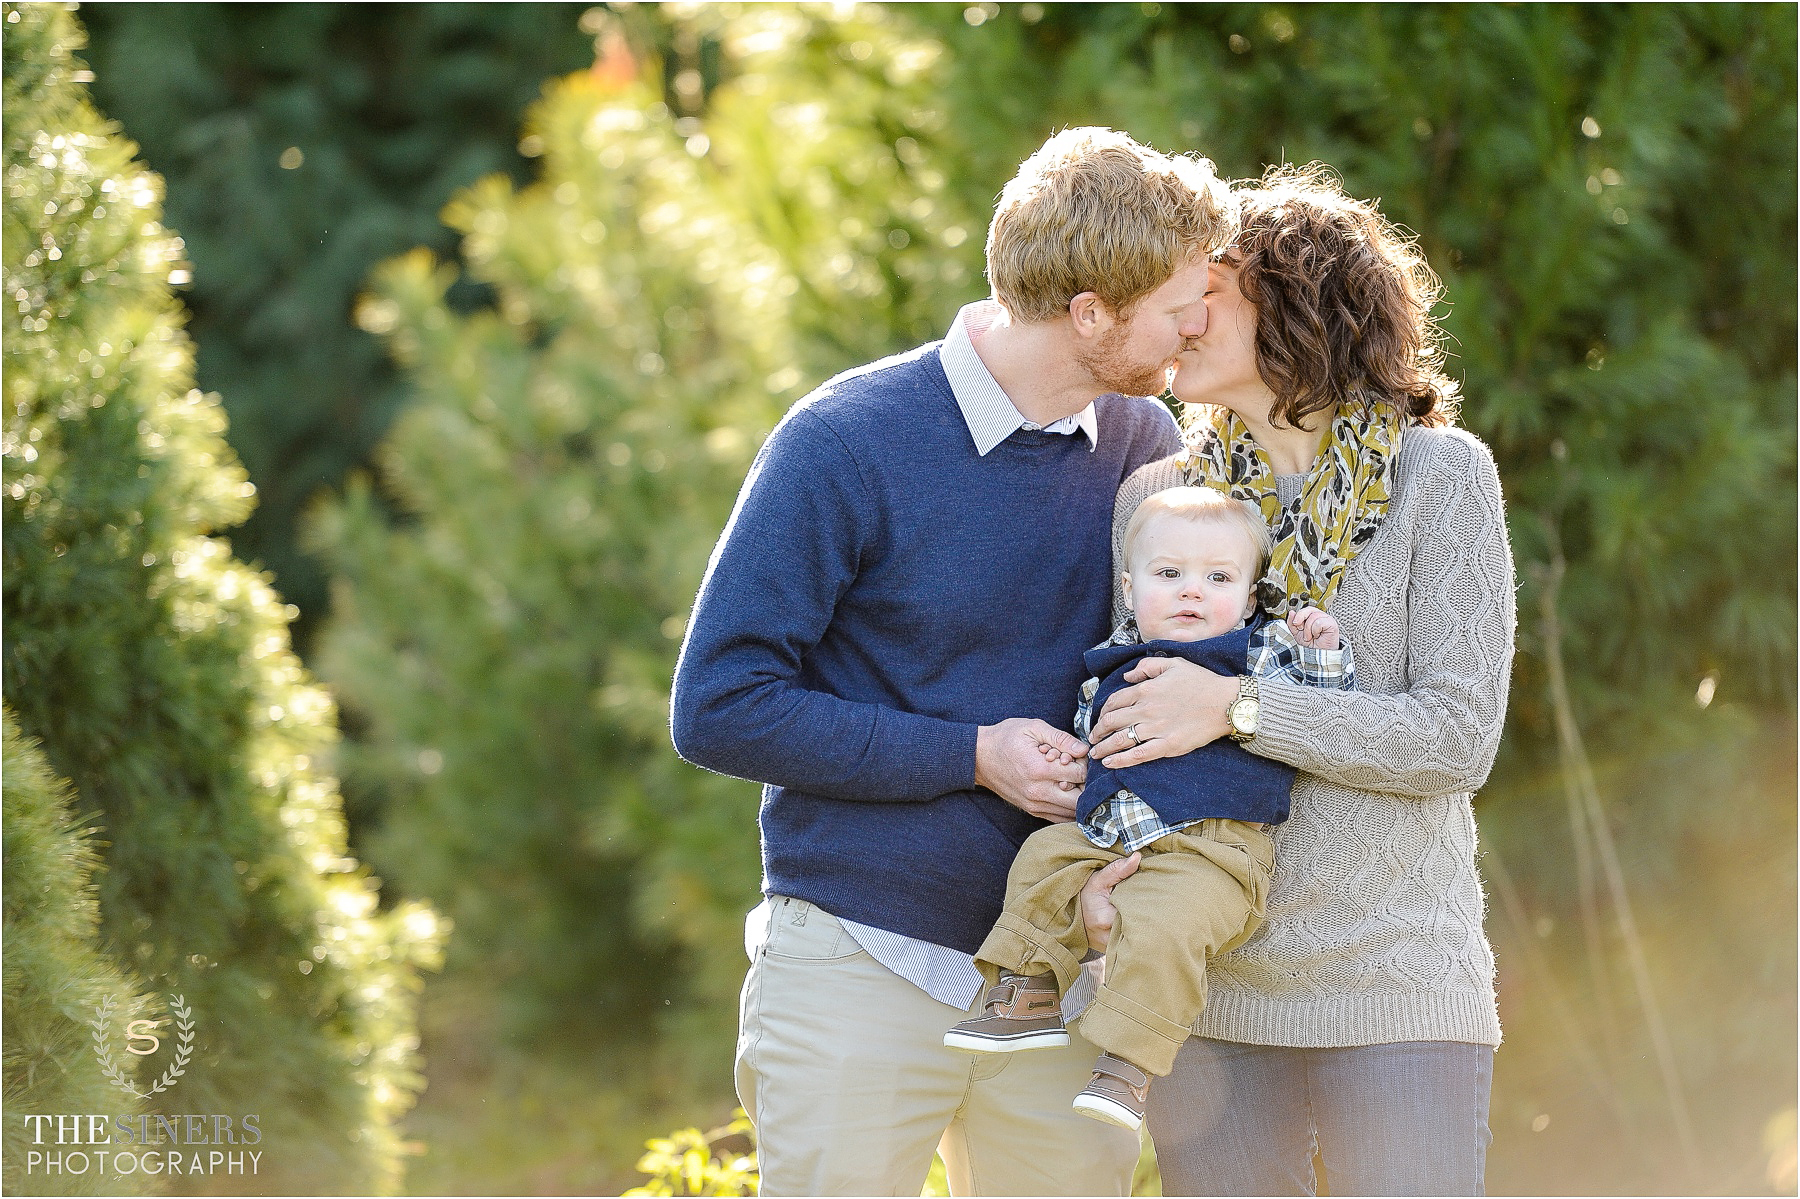 Mahoney Family_Indianapolis Family Photographer_TheSinersPhotography_0019